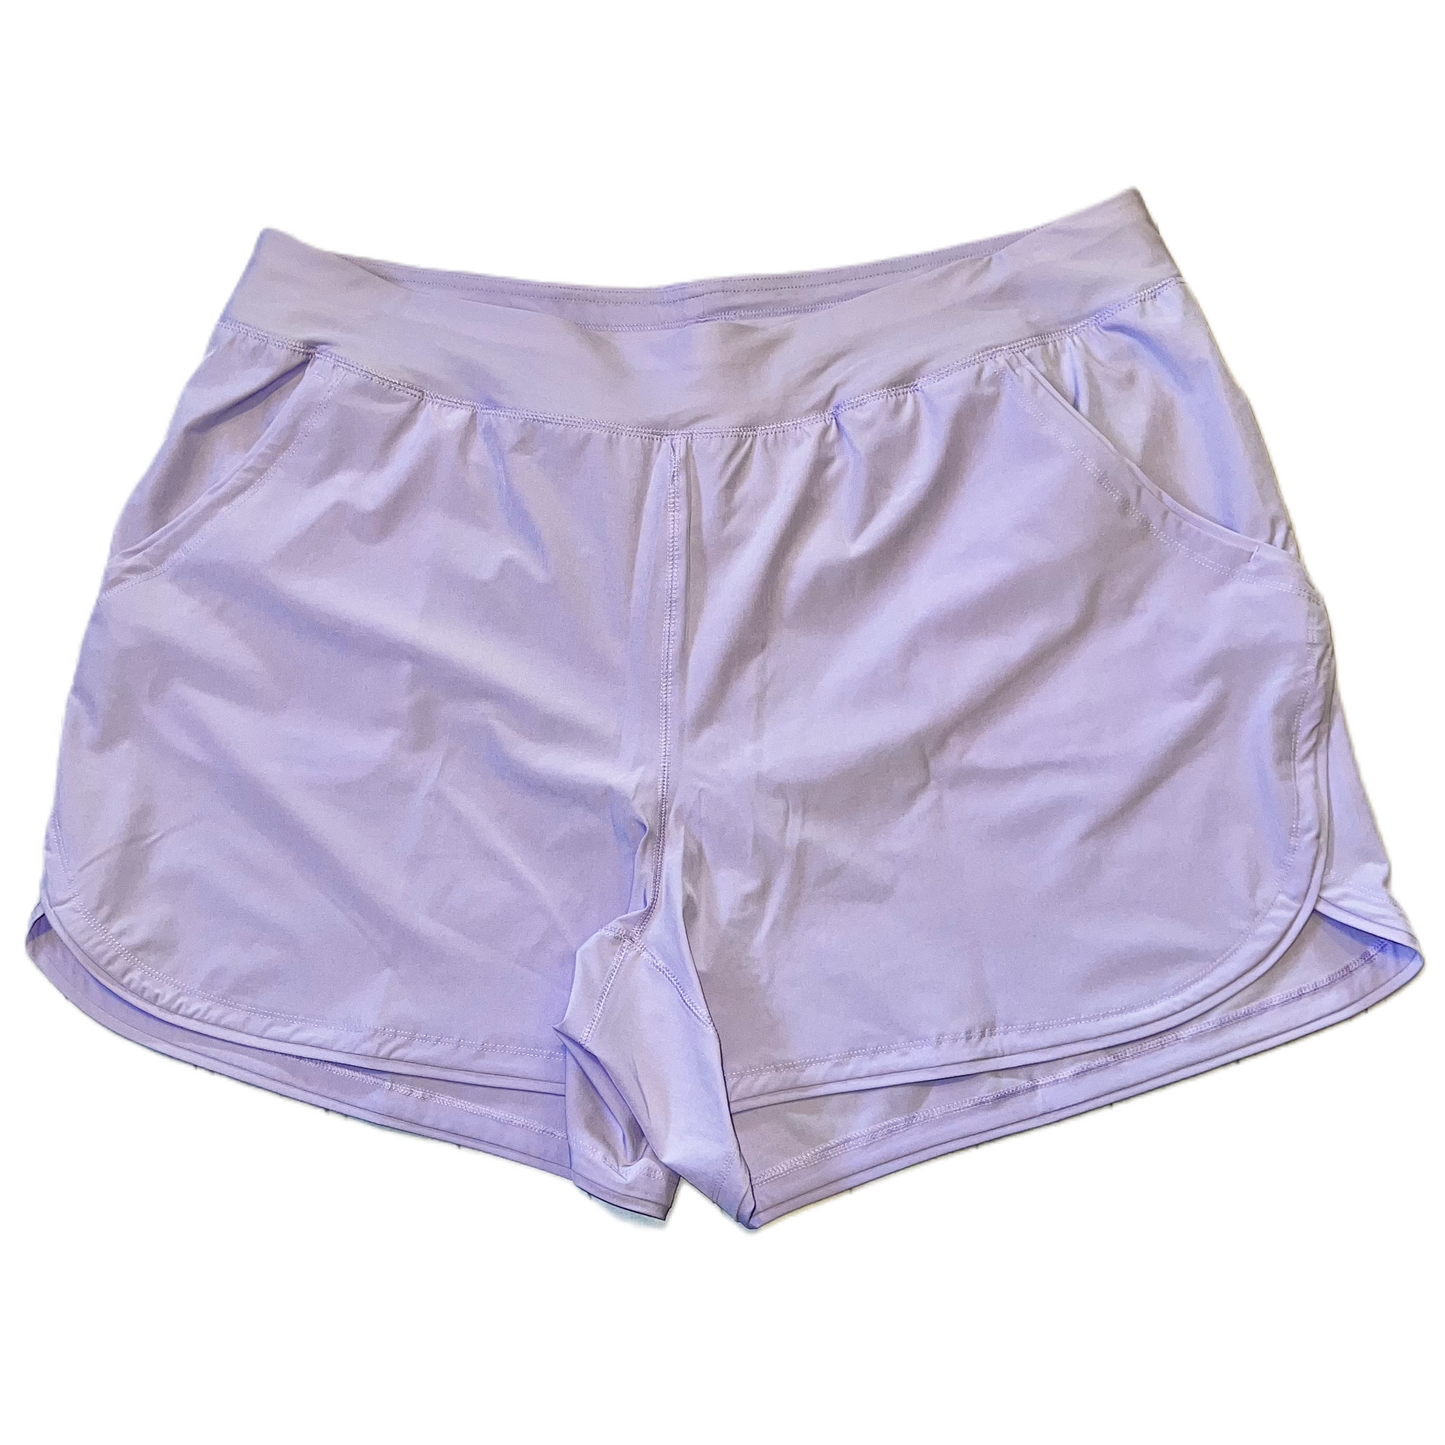 Lavender Athletic Shorts By Lands End, Size: 22w